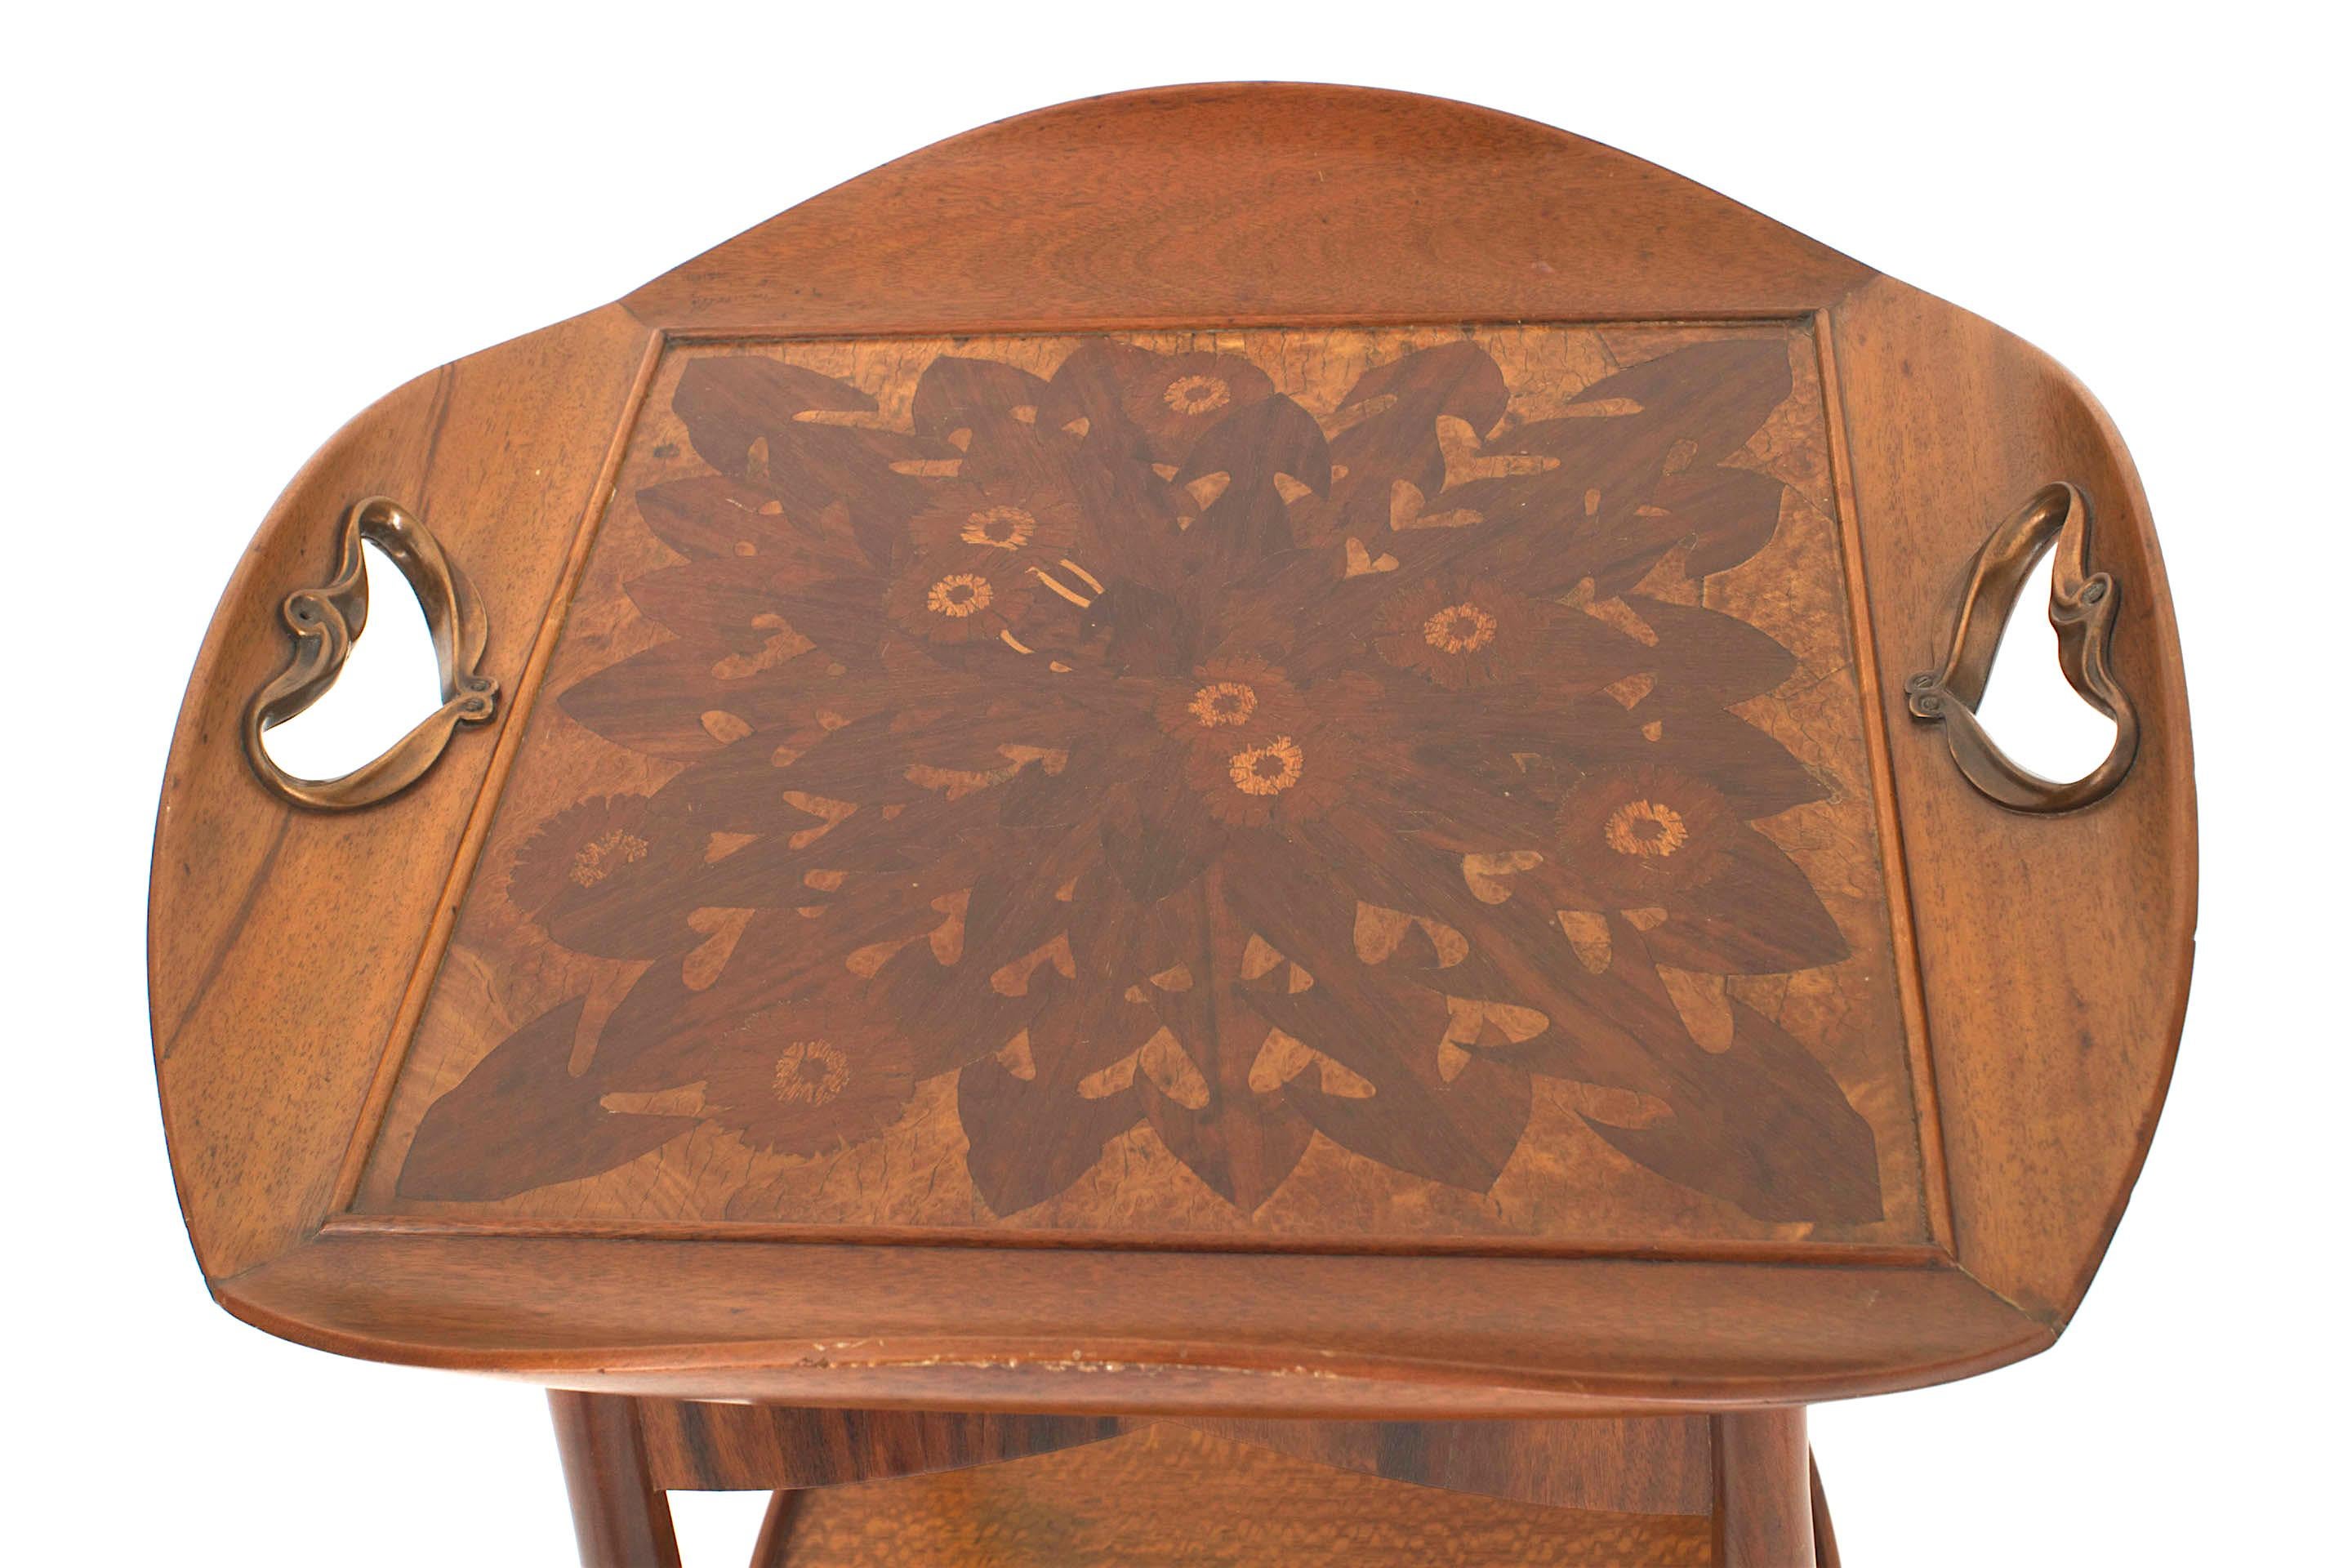 French Art Nouveau walnut square end table having a floral inlaid tray top with open copper handles and curved raised sides with a burl maple bottom shelf. (Attributed to MAJORELLE)
